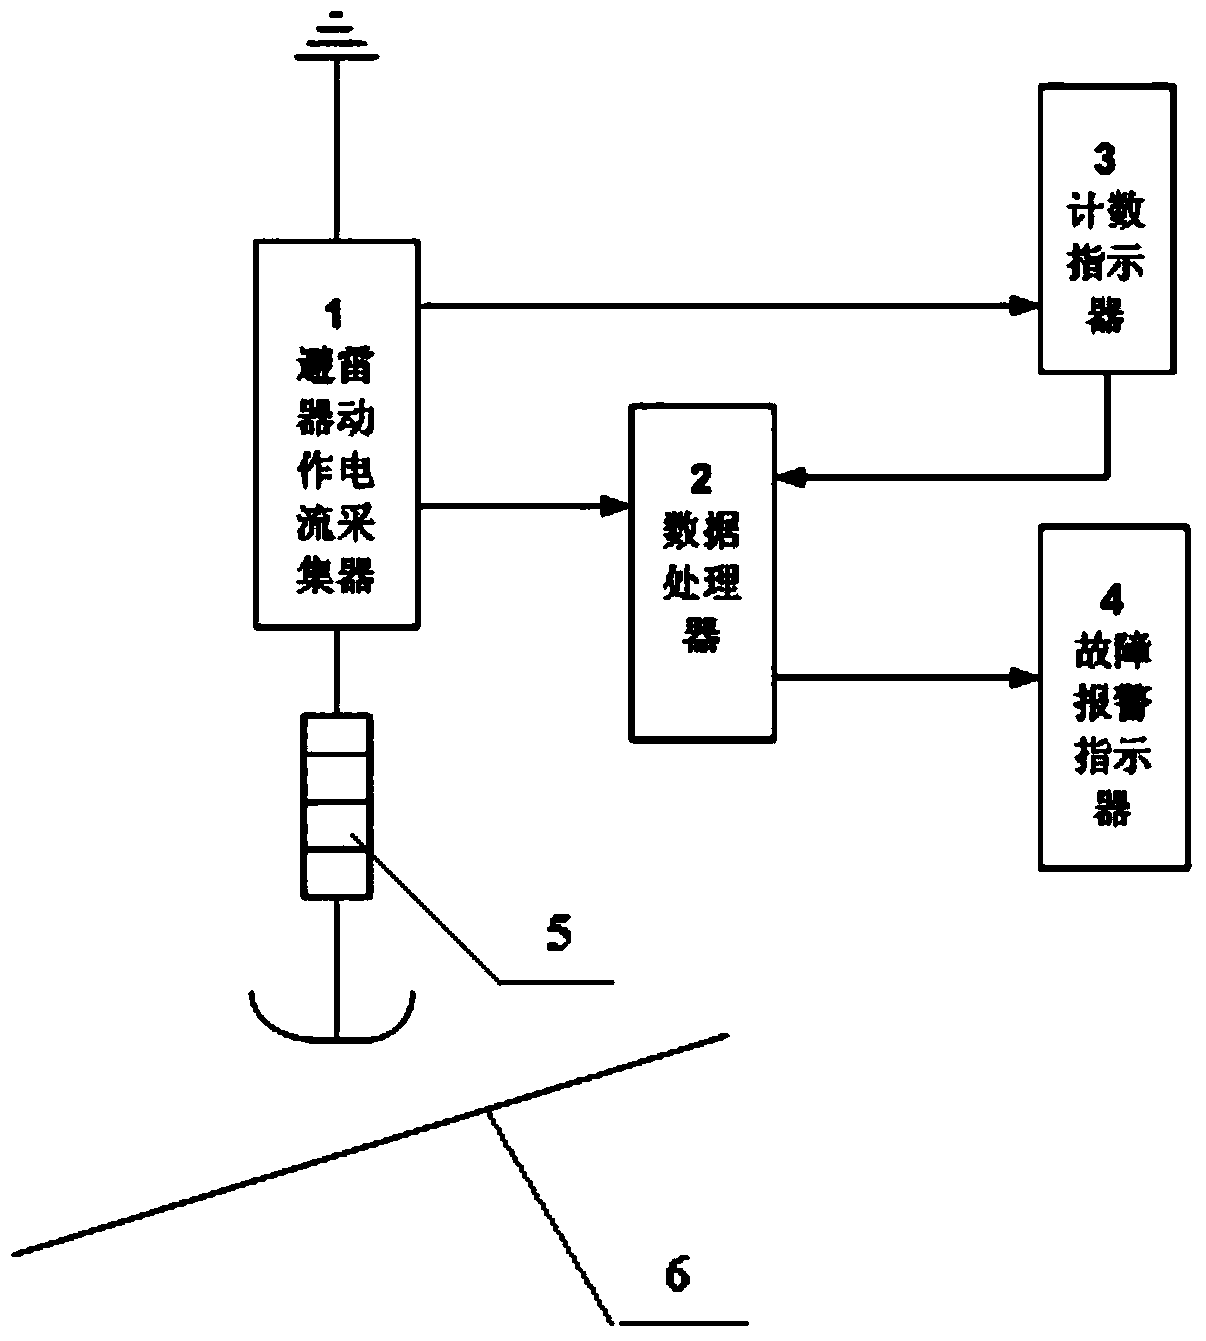 Method and device for online detection of state of leakage conductor with series gap